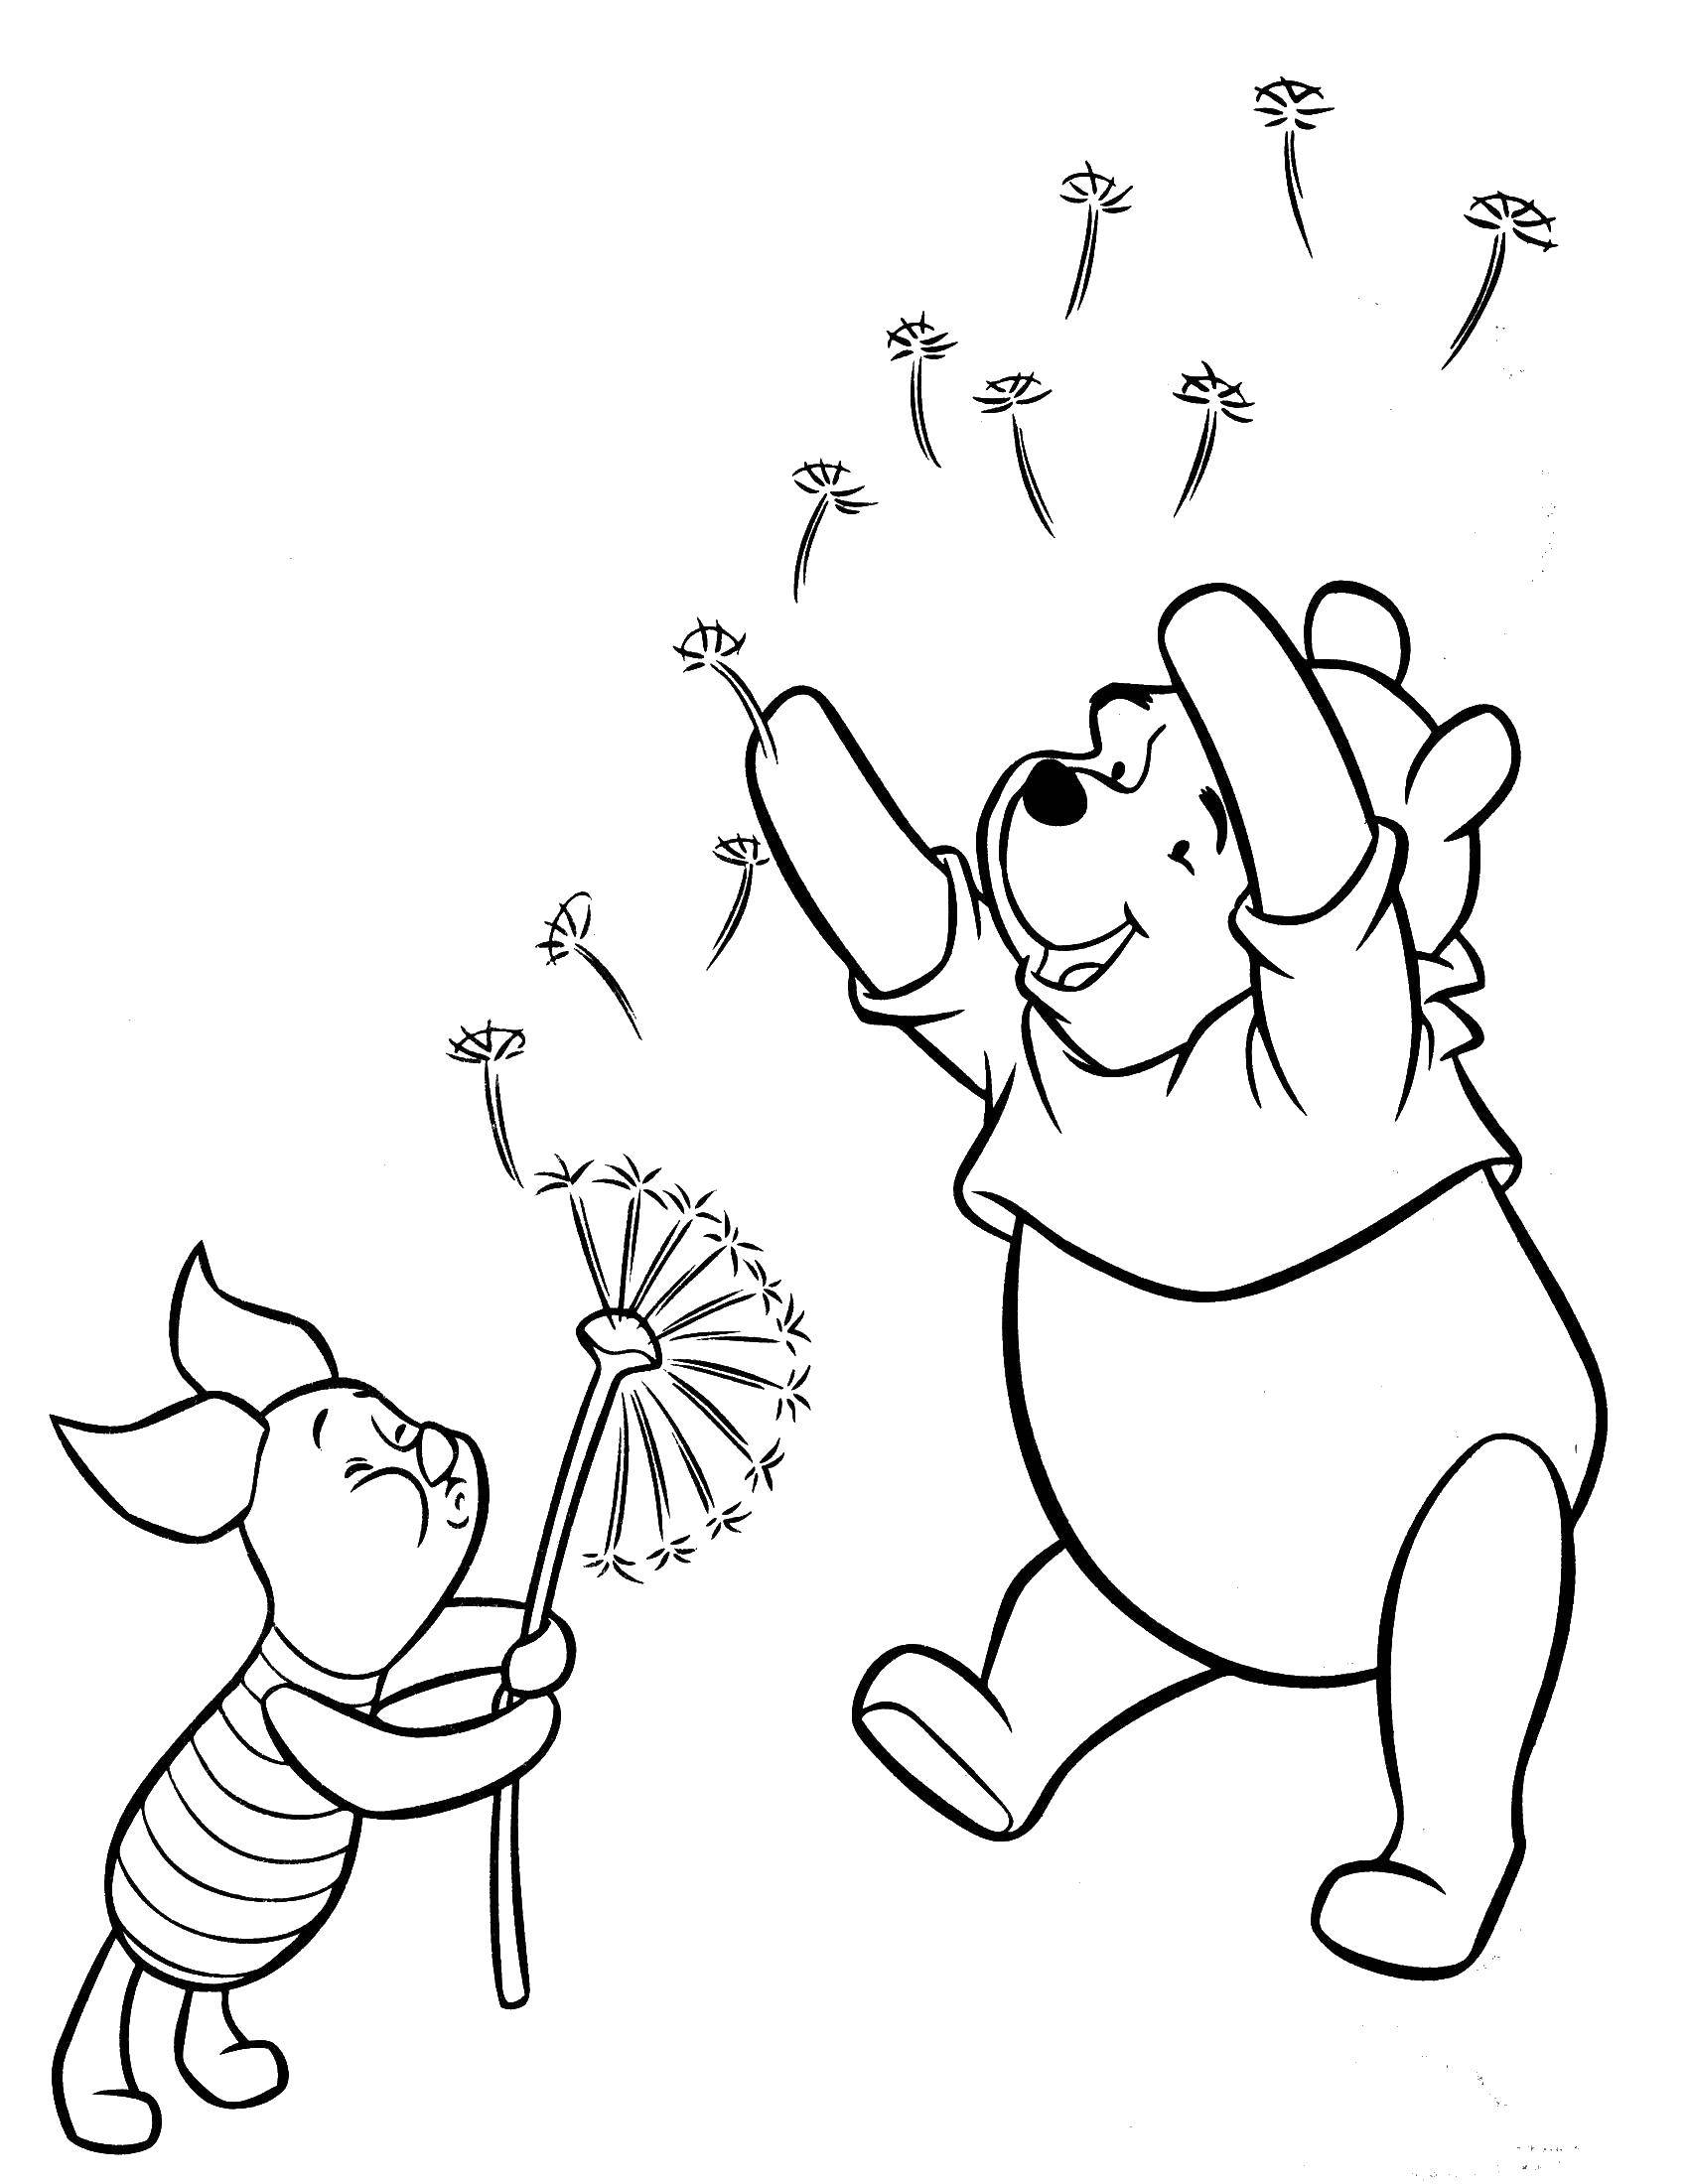 Coloring Winnie the Pooh and Piglet. Category Disney cartoons. Tags:  Disney honey, Winnie the Pooh, Piglet.